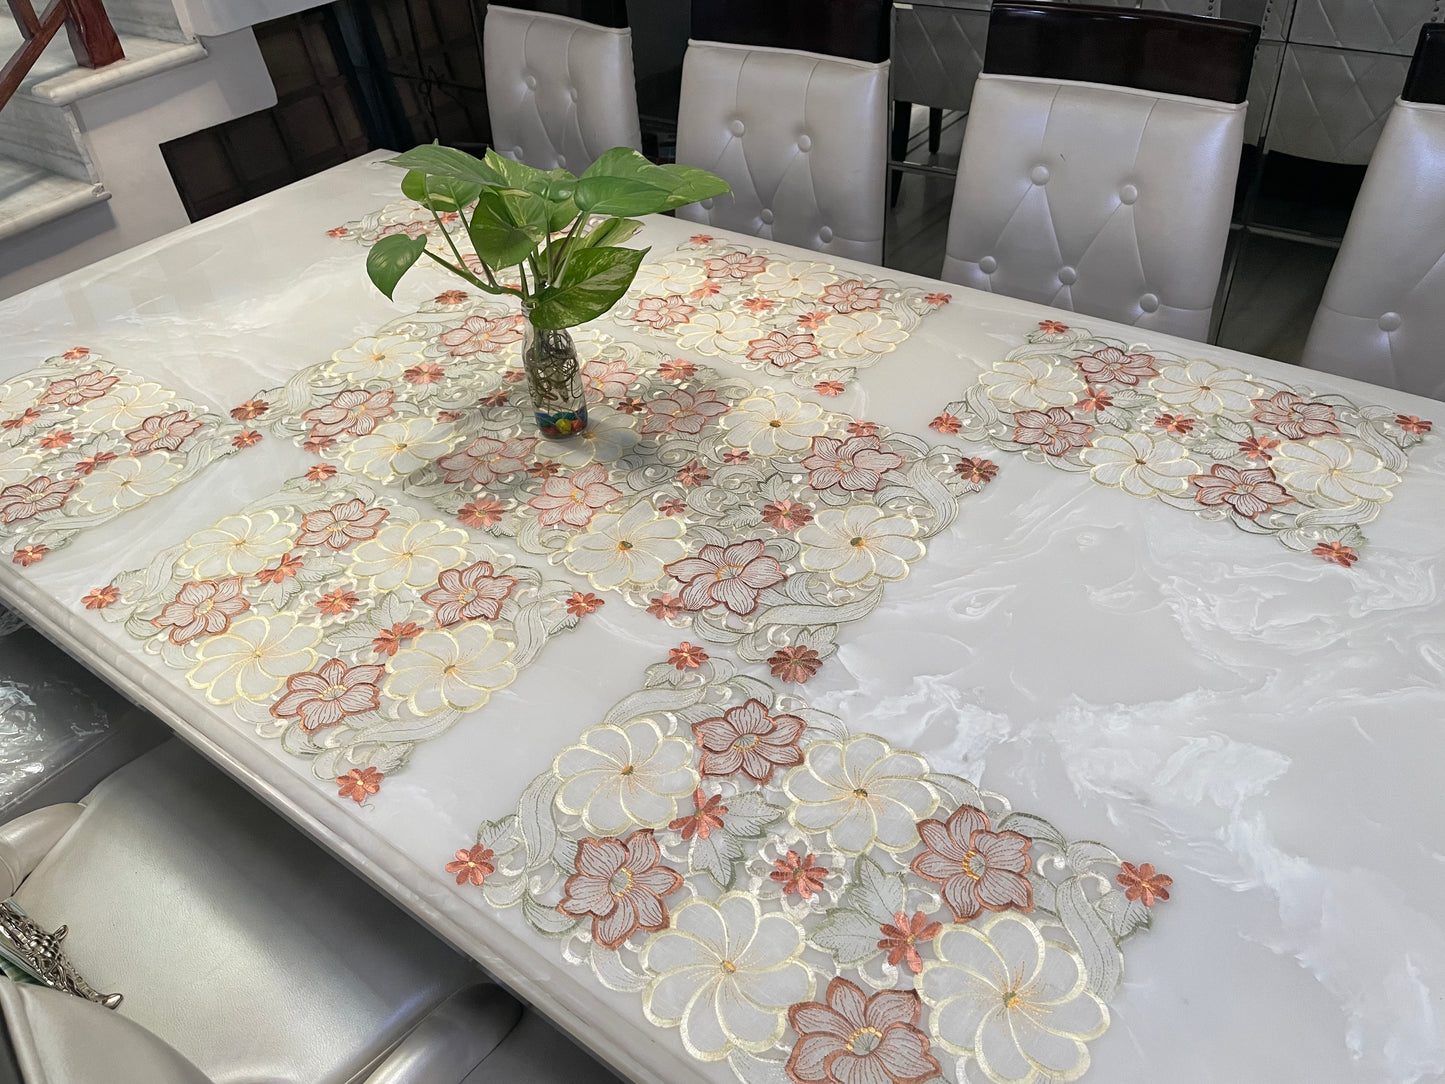 Embroidered Tissue Fabric Placemats and Runner combo